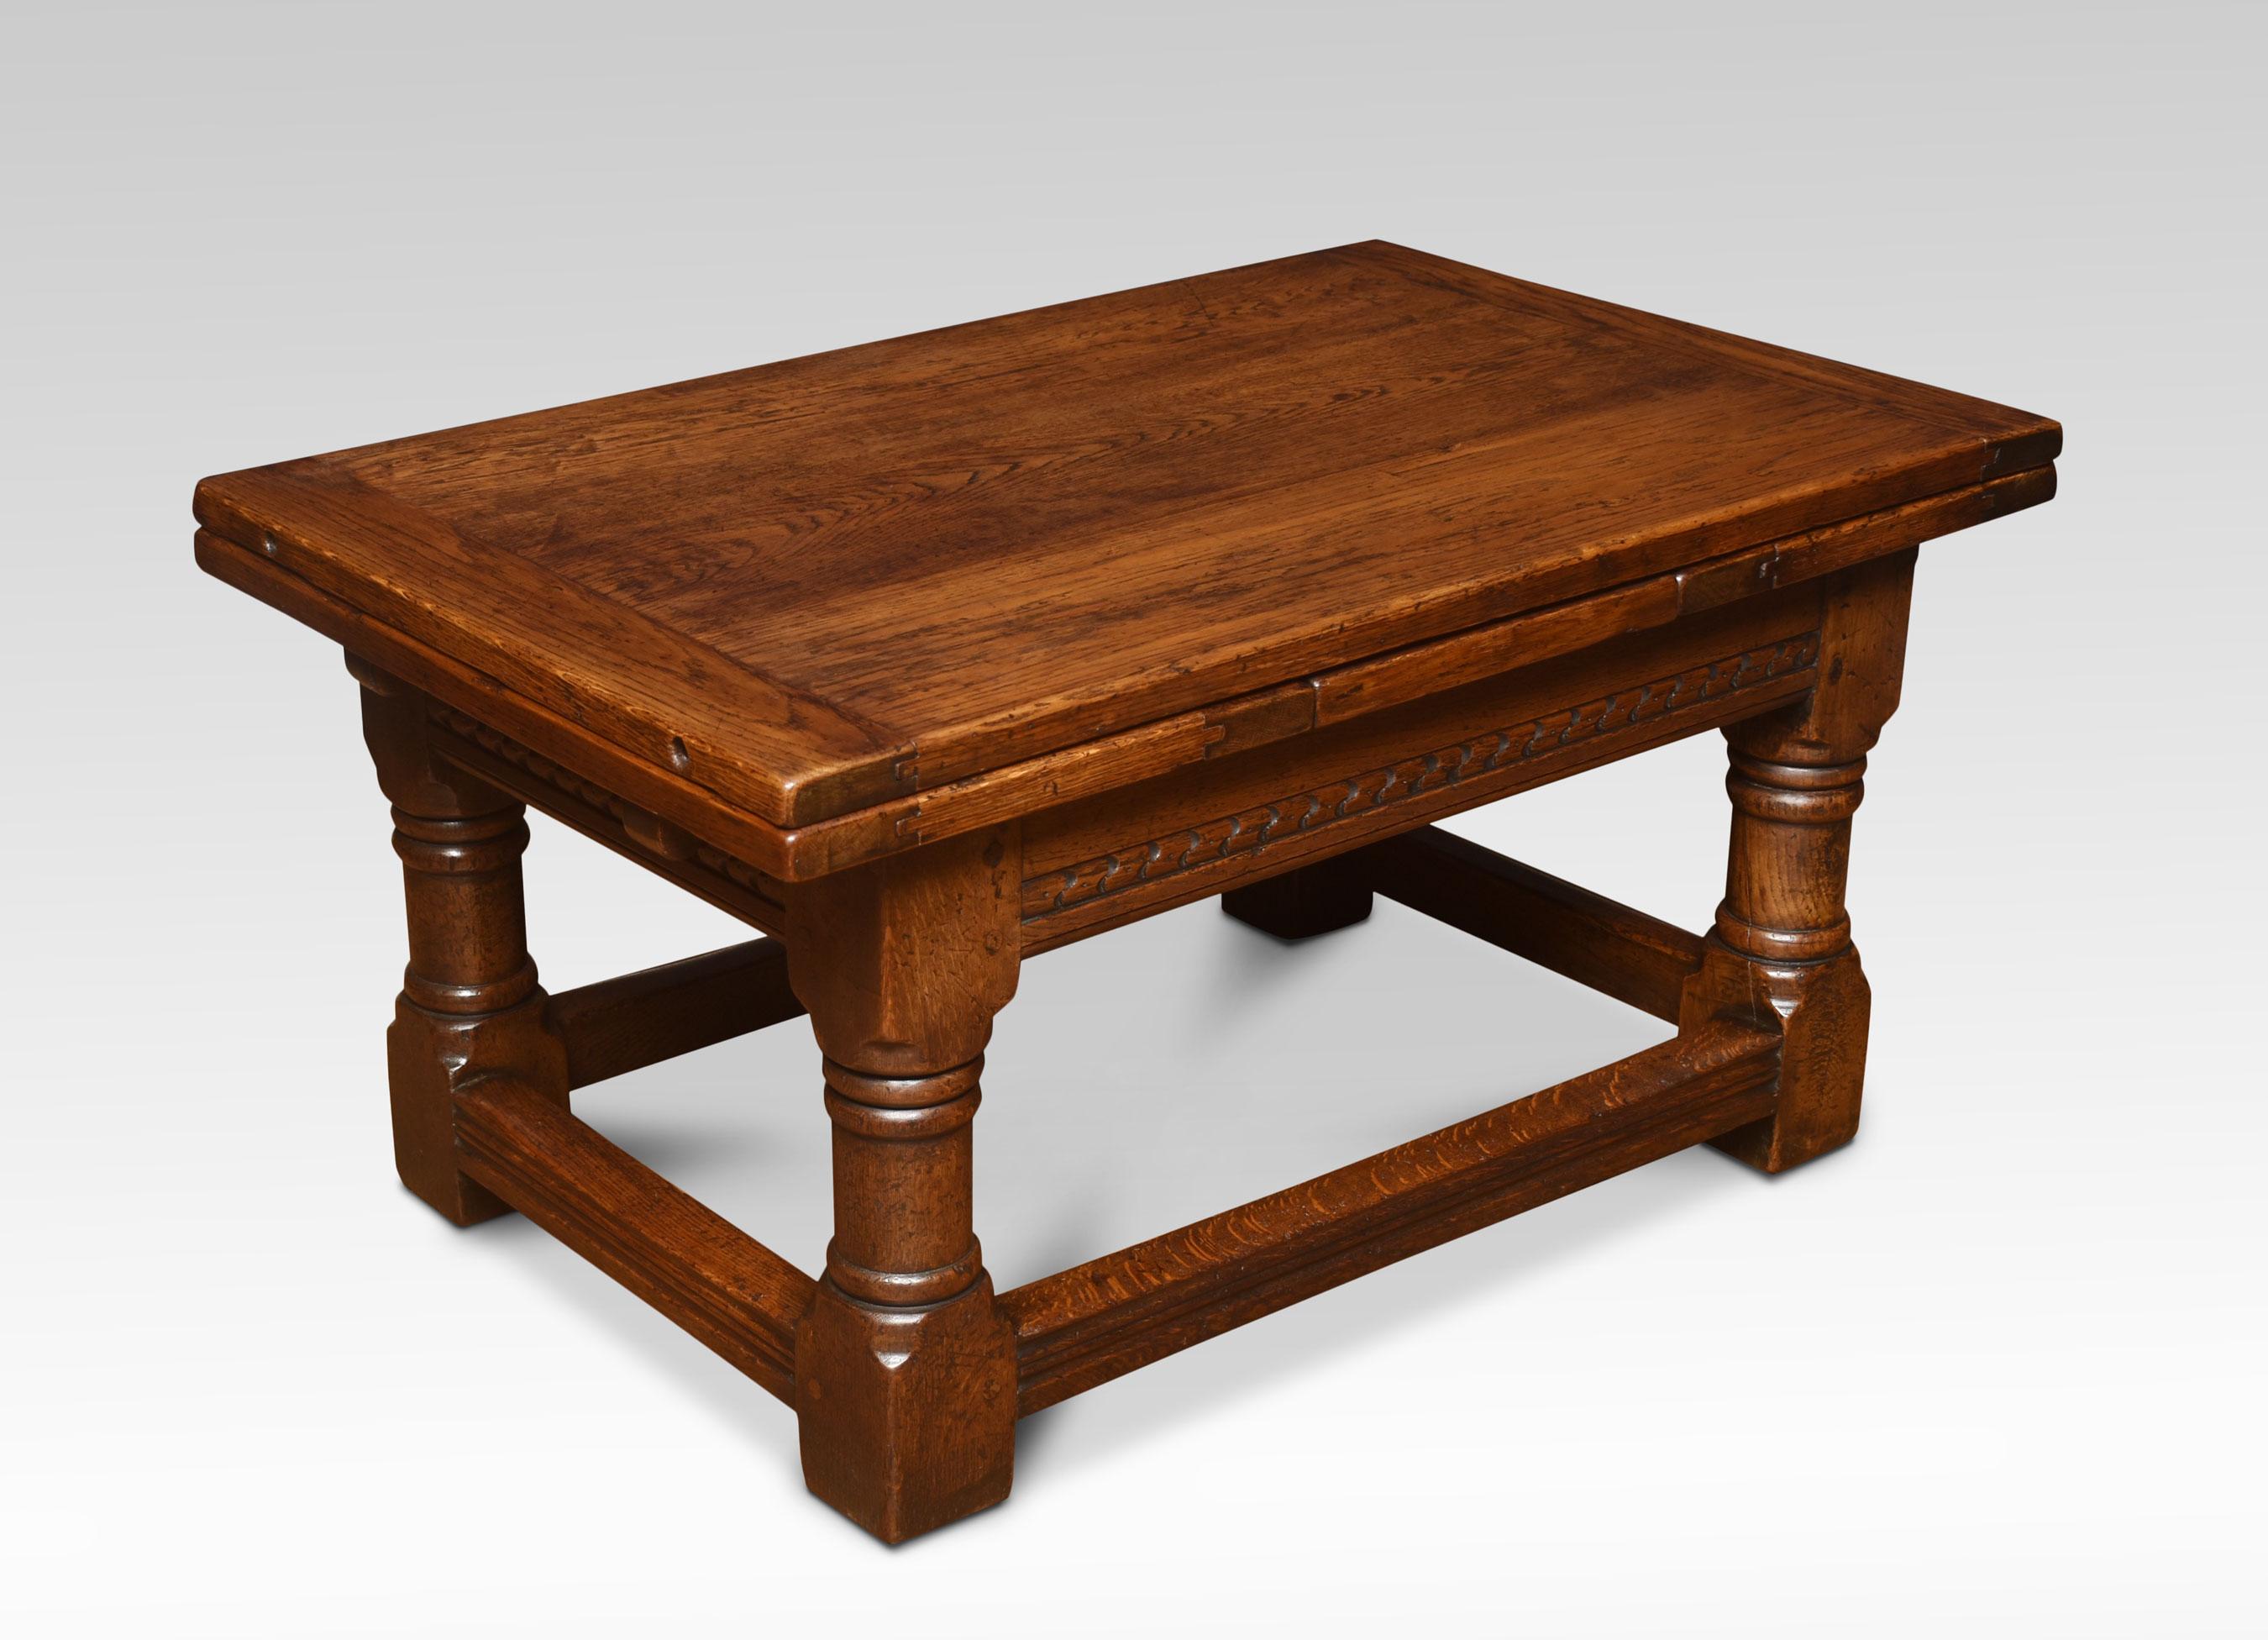 Oak draw leaf coffee table, the rectangular solid oak top above two pull-out ends, Raised up on turned legs united by stretchers.
Dimensions
Height 21.5 inches
Width 42 inches when leaves are open 72 inches
Depth 26.5 inches.